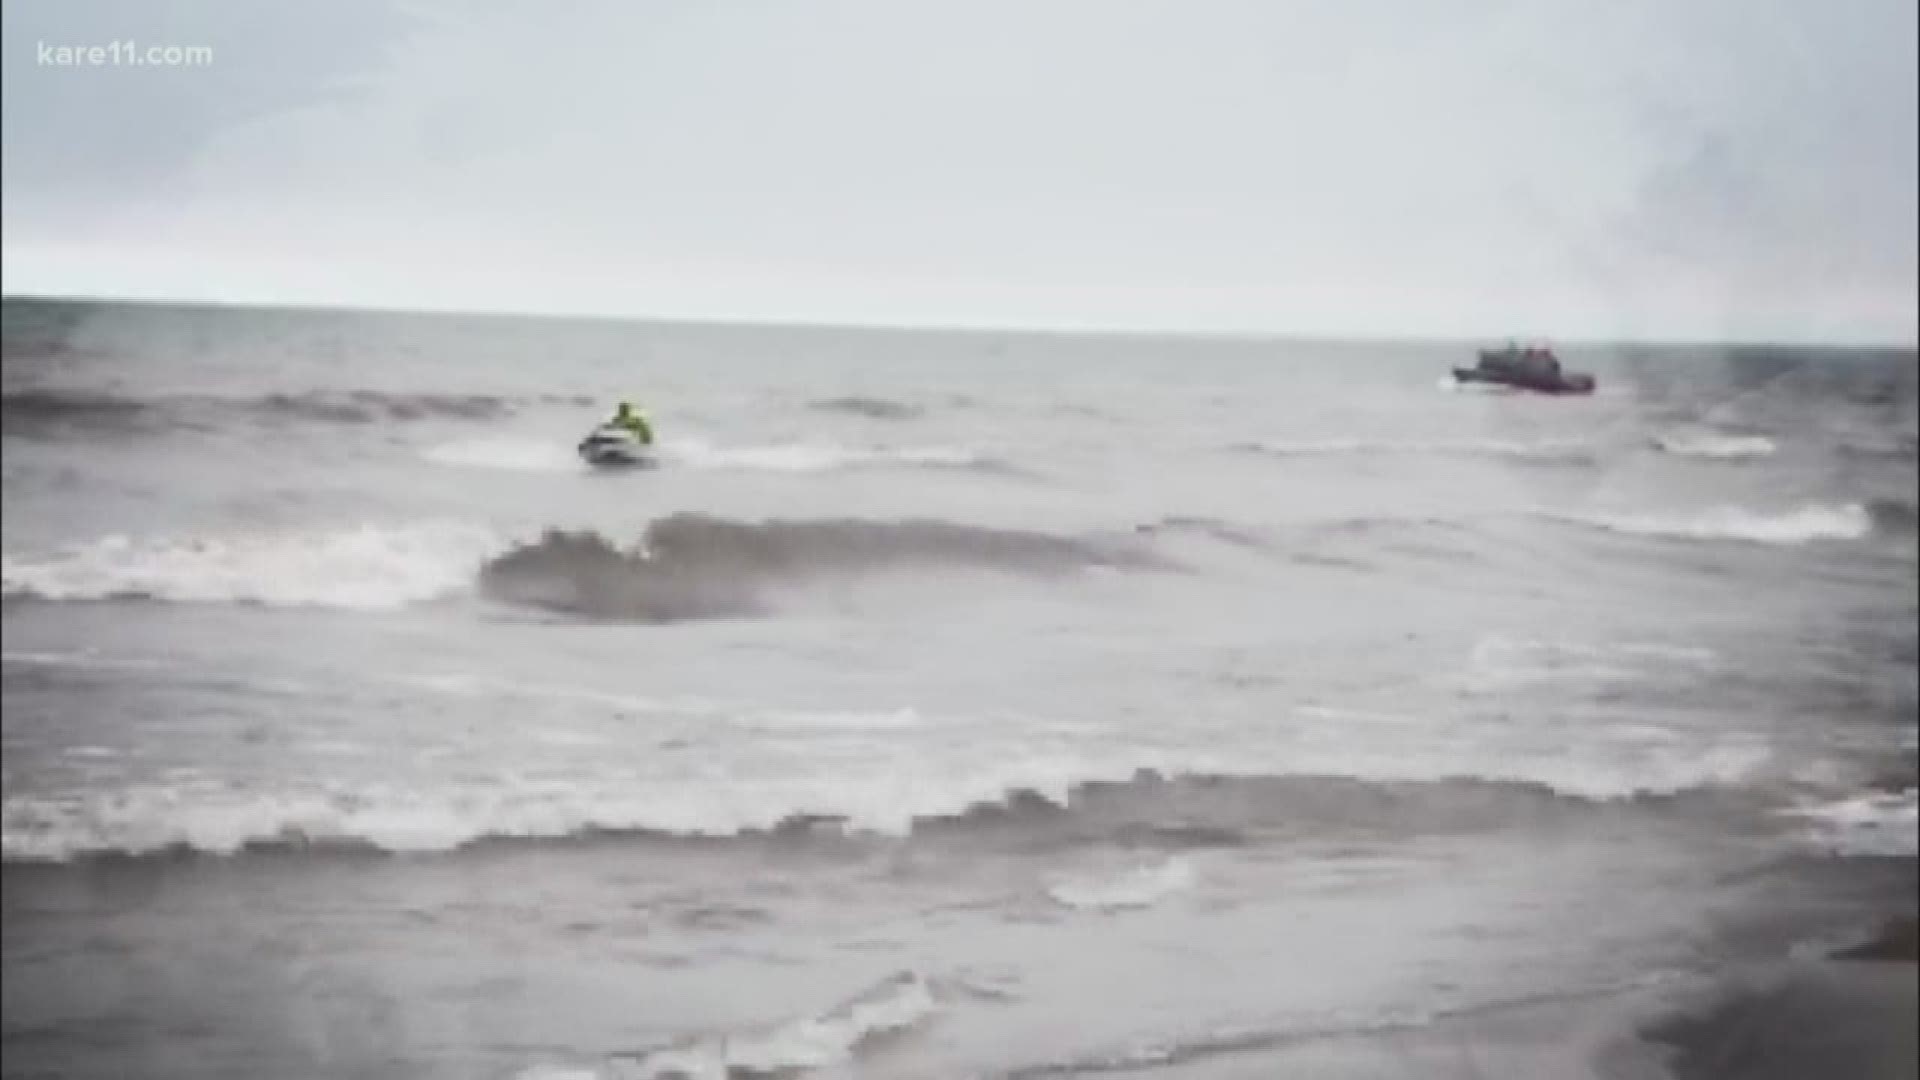 A Wisconsin man is dead after the boat he was in overturned on a turbulent Lake Superior Monday. Two companions managed to make it to shore.